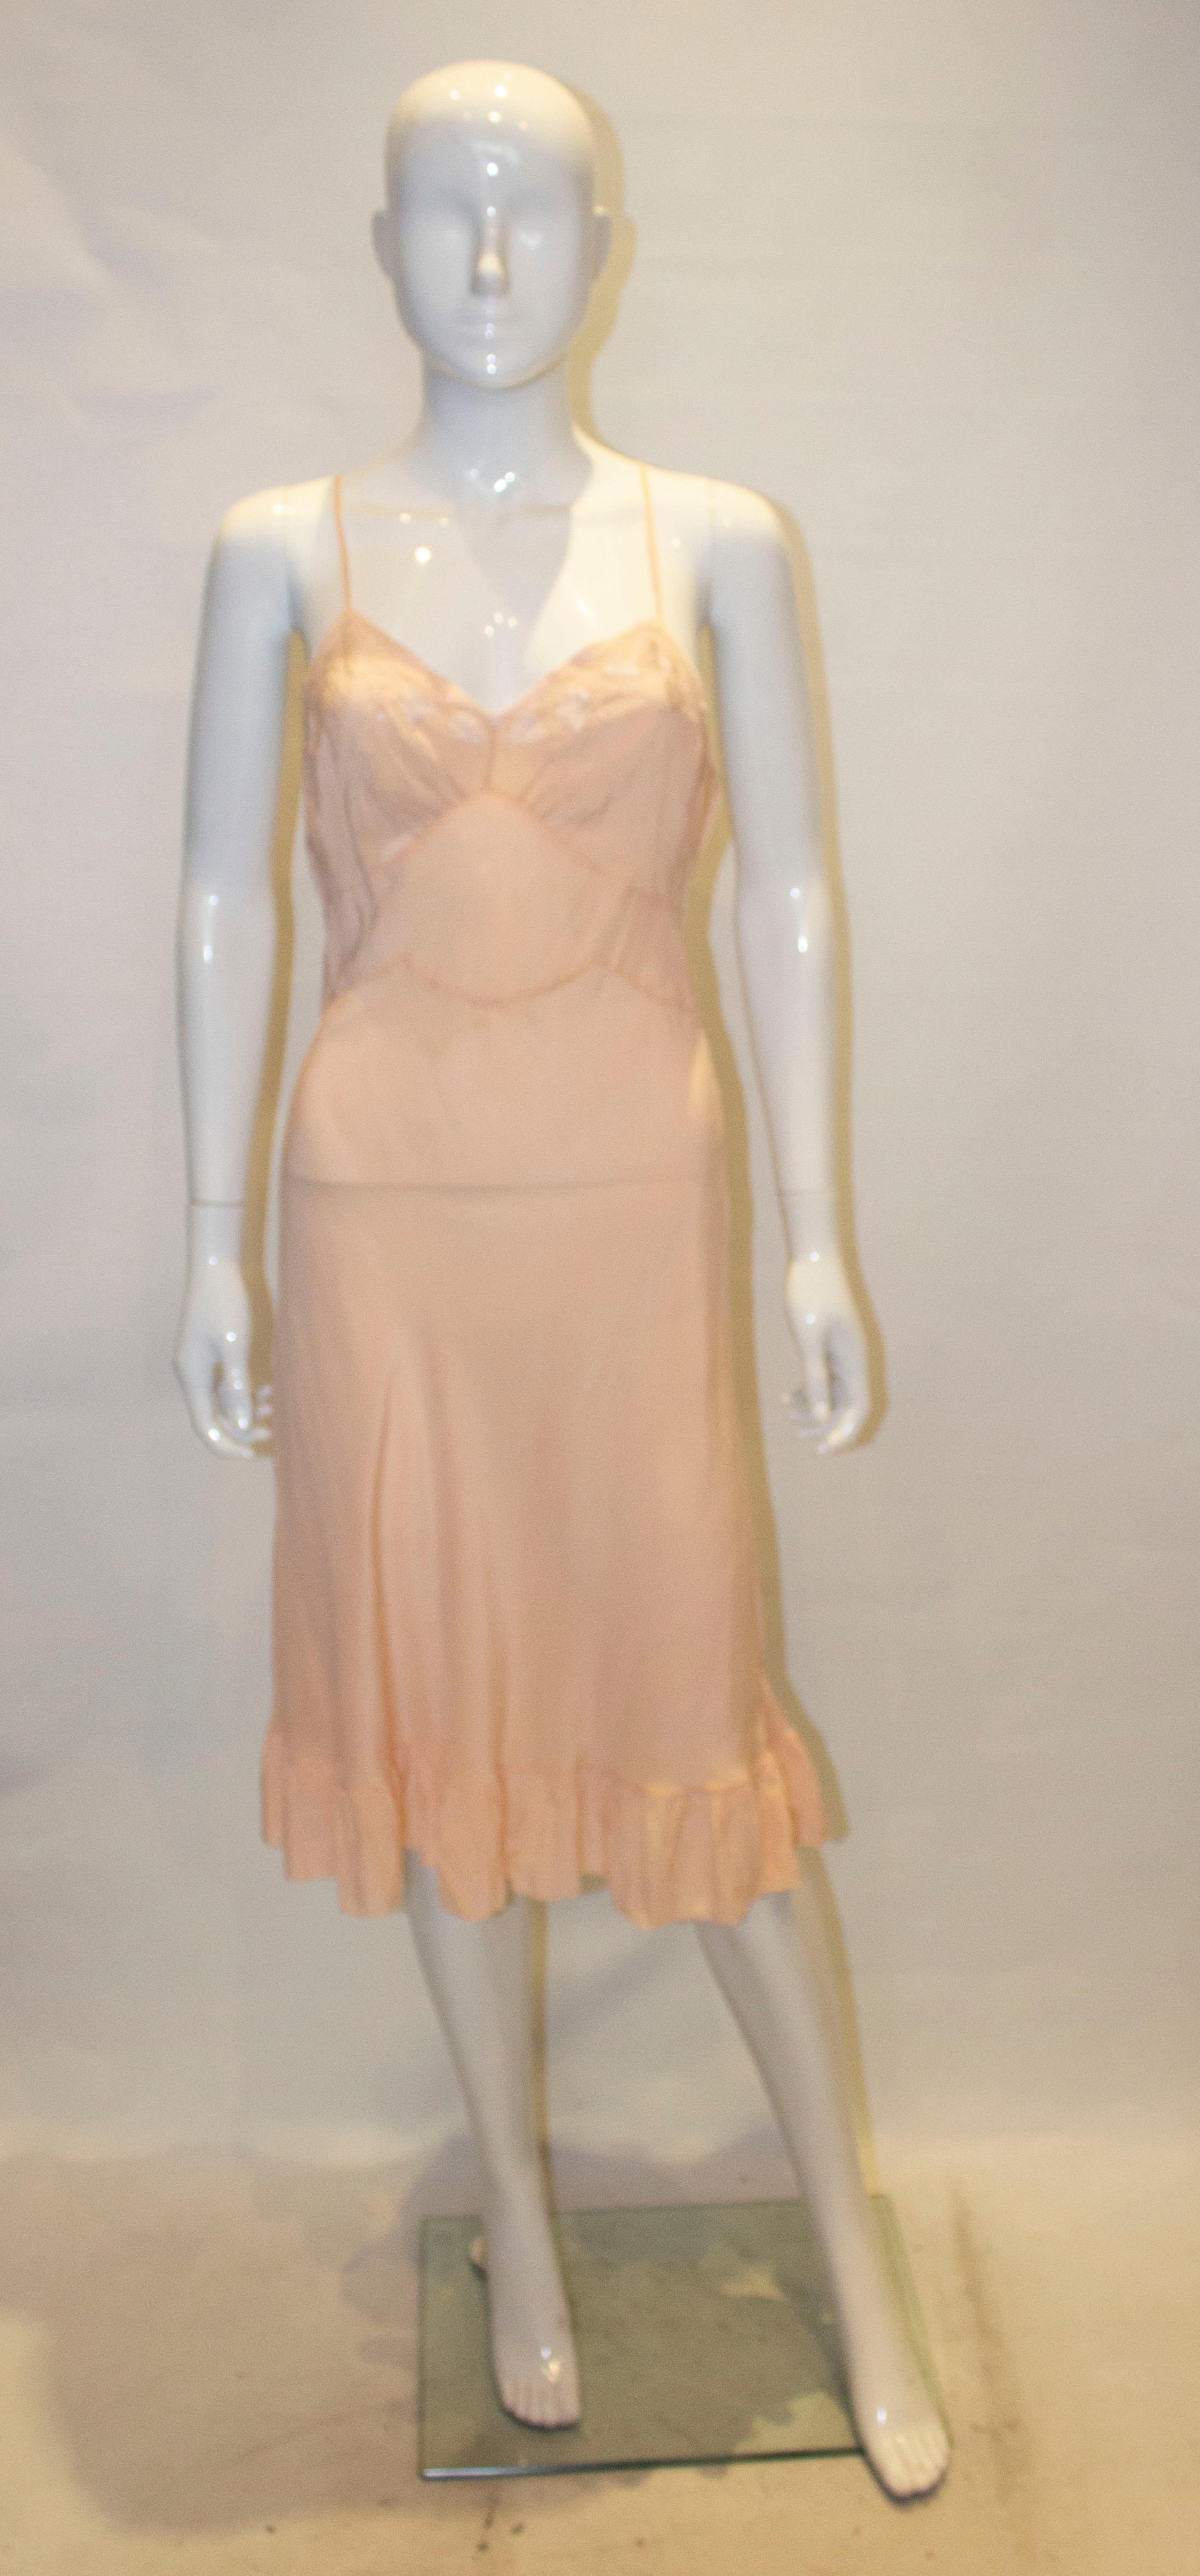 A vintage silk slip dress in a pretty peach colour.  The slip dress has a v neckline with embroidery on the bust area, and a frill at the hem.